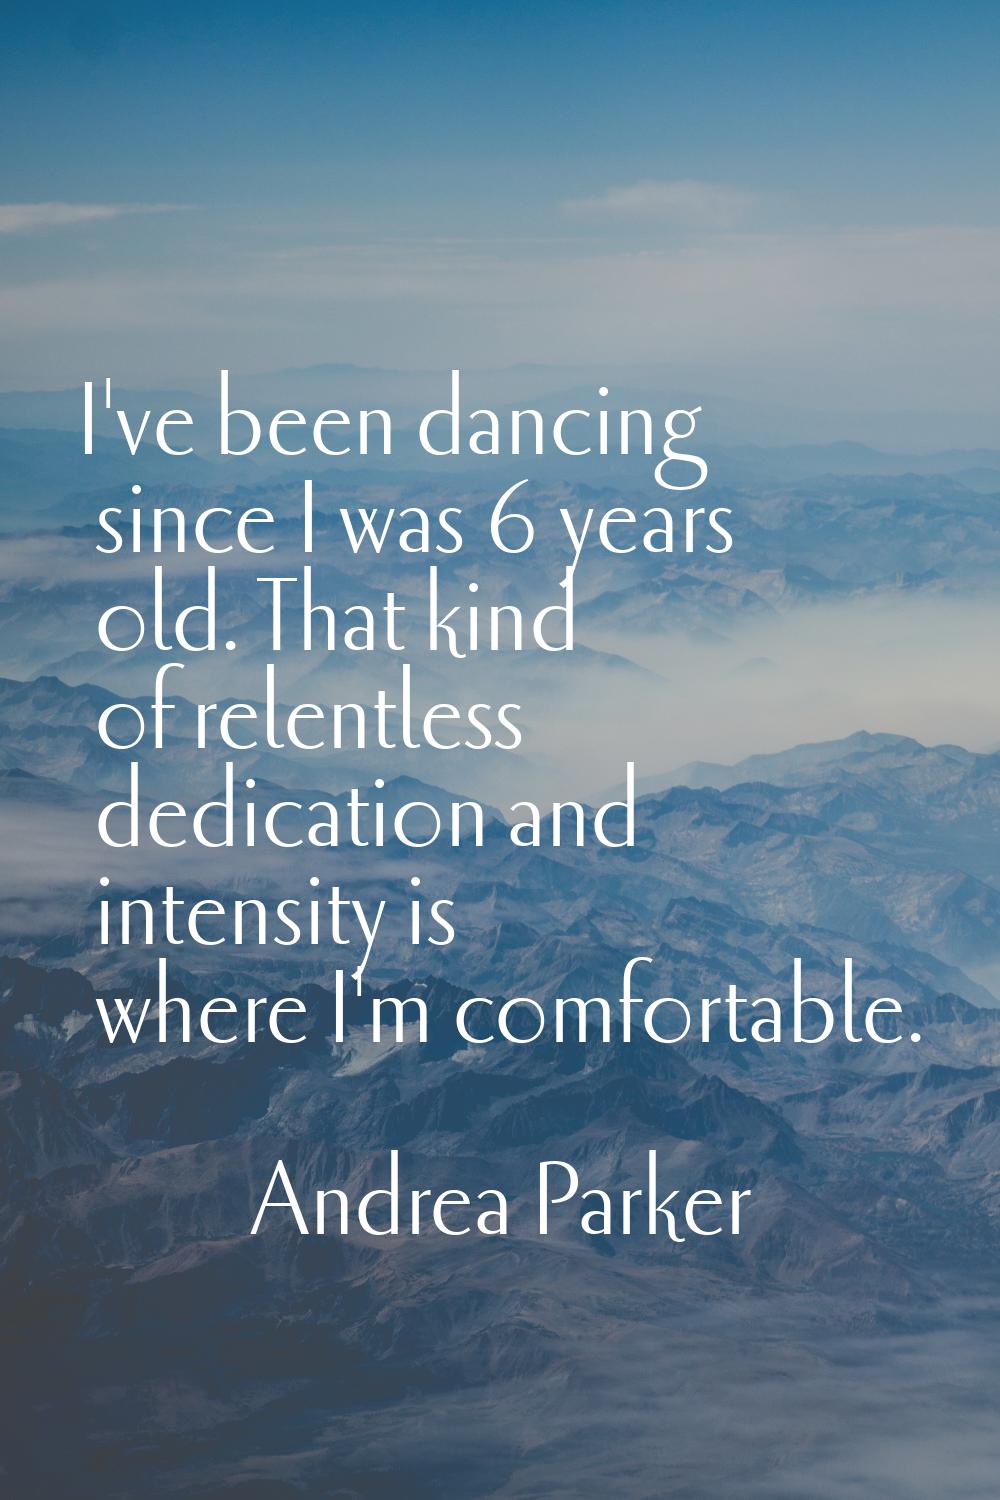 I've been dancing since I was 6 years old. That kind of relentless dedication and intensity is wher